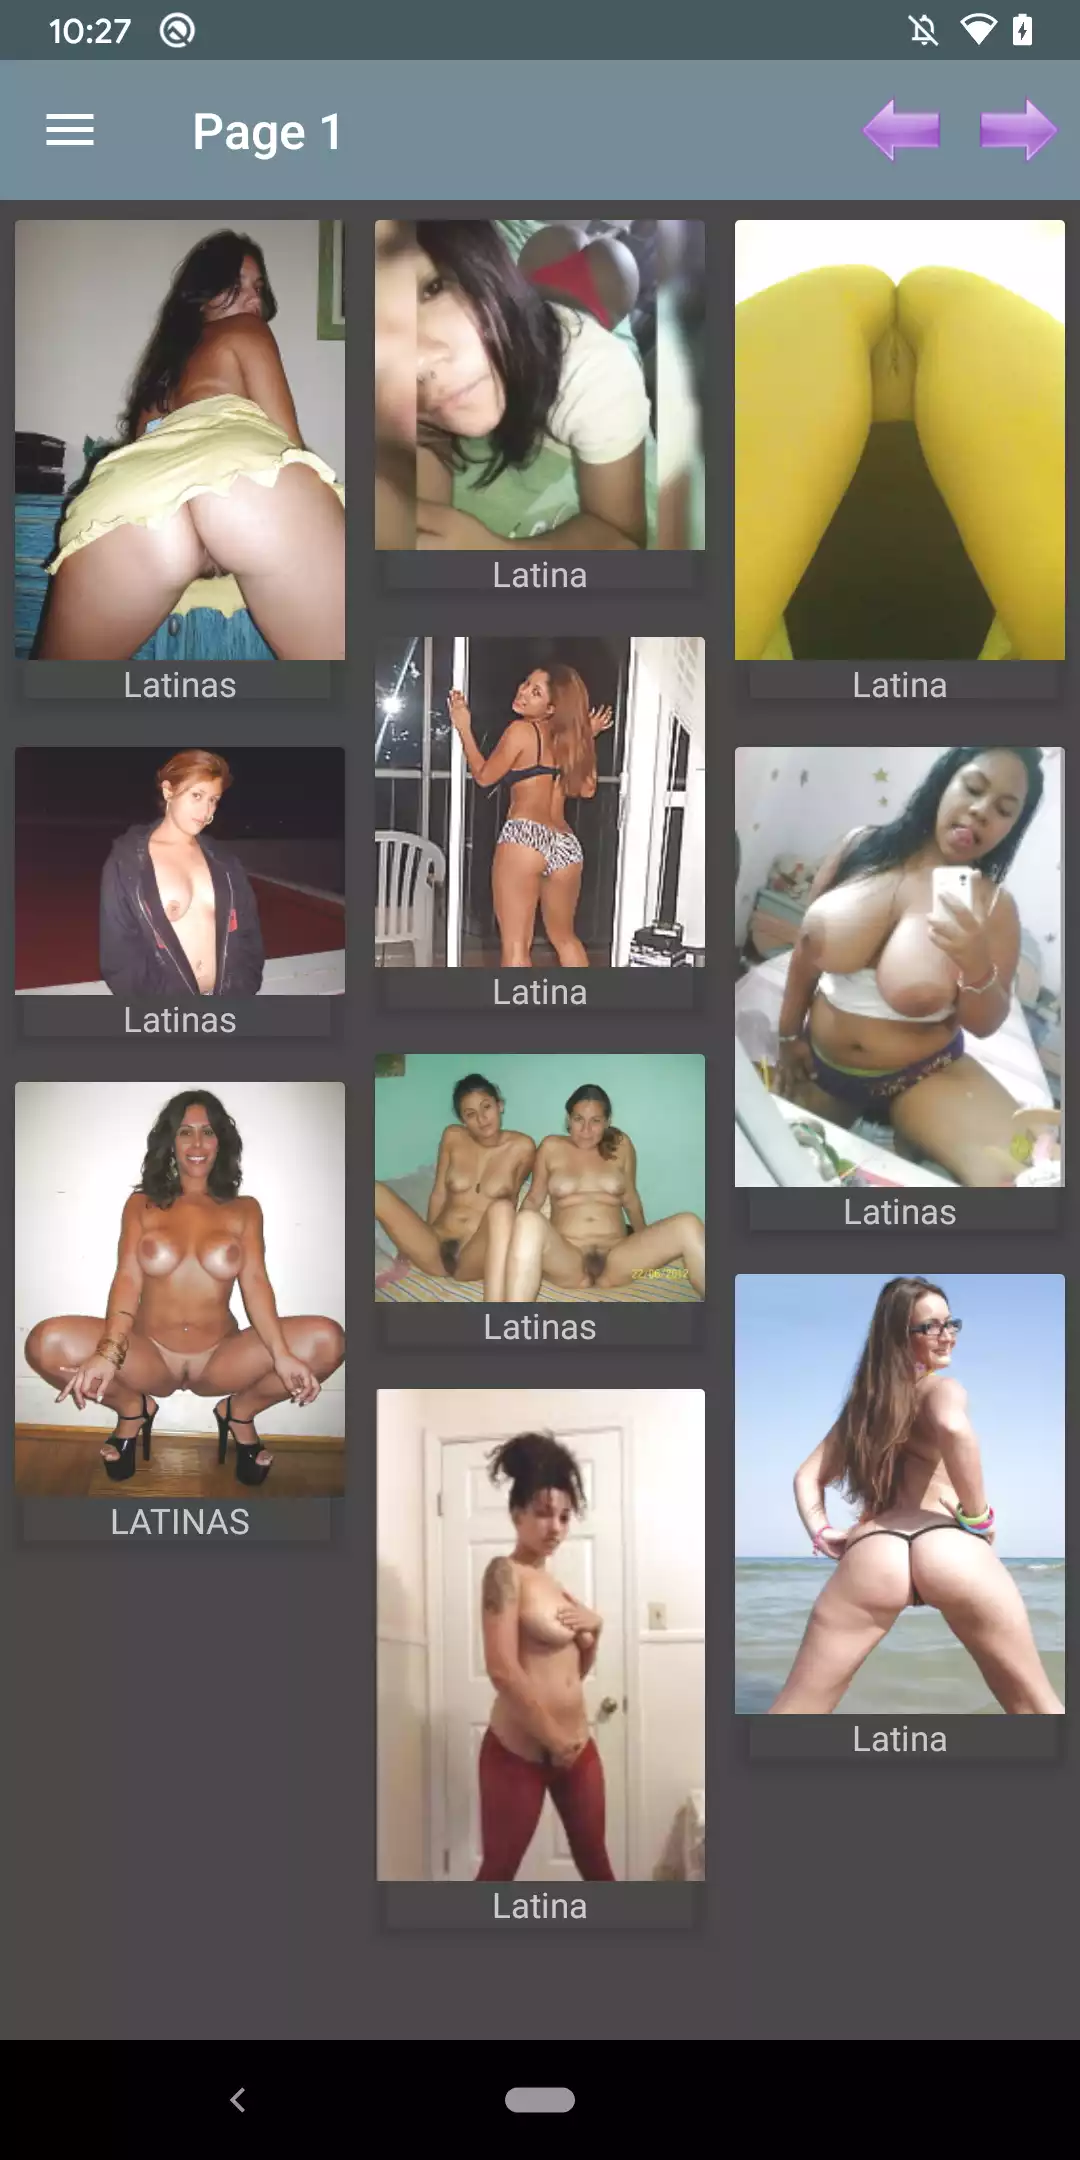 Latina Pics for,pictures,latina,download,porn,brasil,app,apps,pegging,puzzles,sexy,android,pornstars,best,hentai,mexican,manga,gallery,galleries,dance,futanari,where,hot,pics,panties